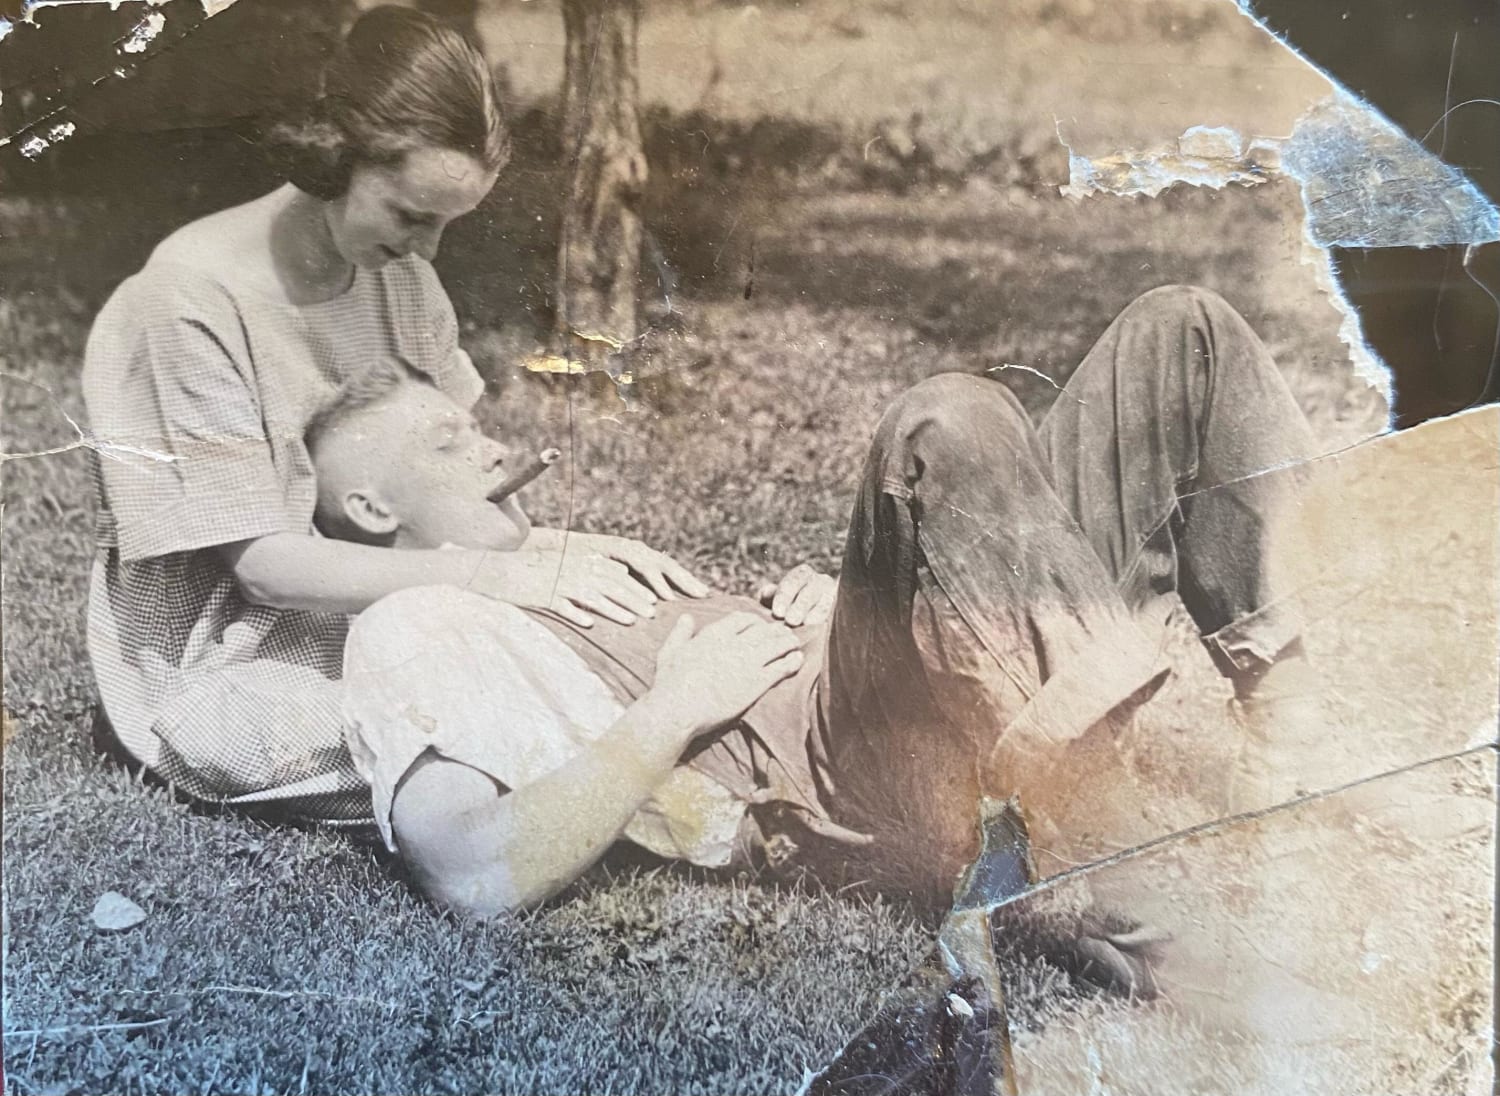 My great-grandfather relaxing in his yard, in my great-grandmother’s lap, shortly after returning from Battle Argonne Forest, WW1. He would be totally blind by 40, due to gas attacks in that battle.